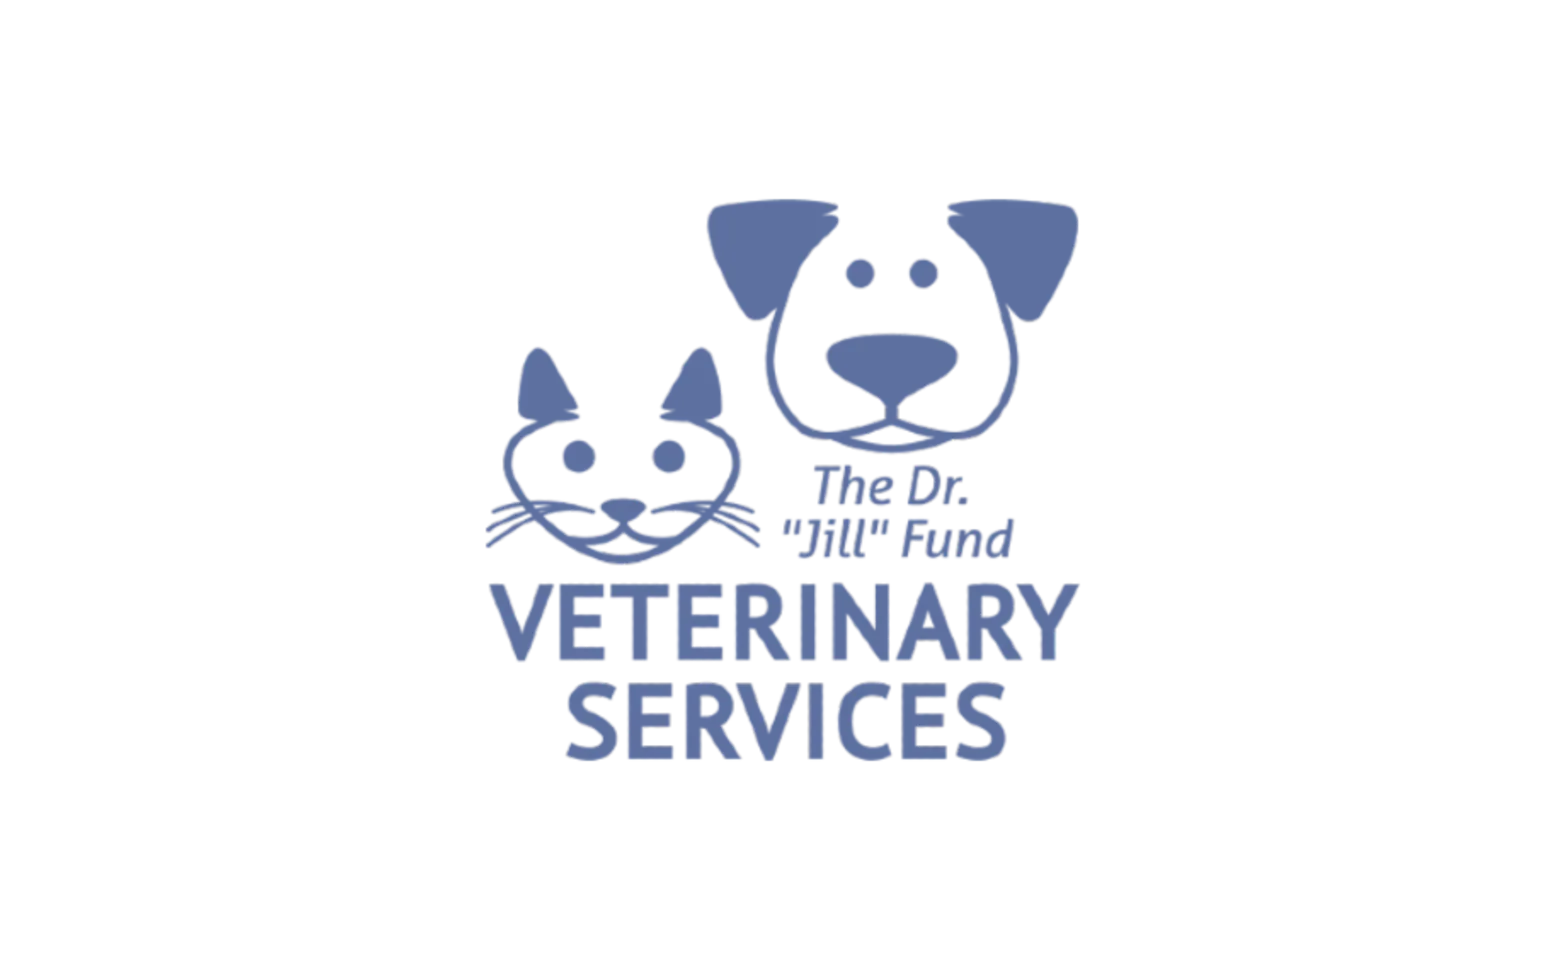 LOGO: A line drawing of a cat and dog with the text "The Dr. 'Jill' Fund Veterinary Services"